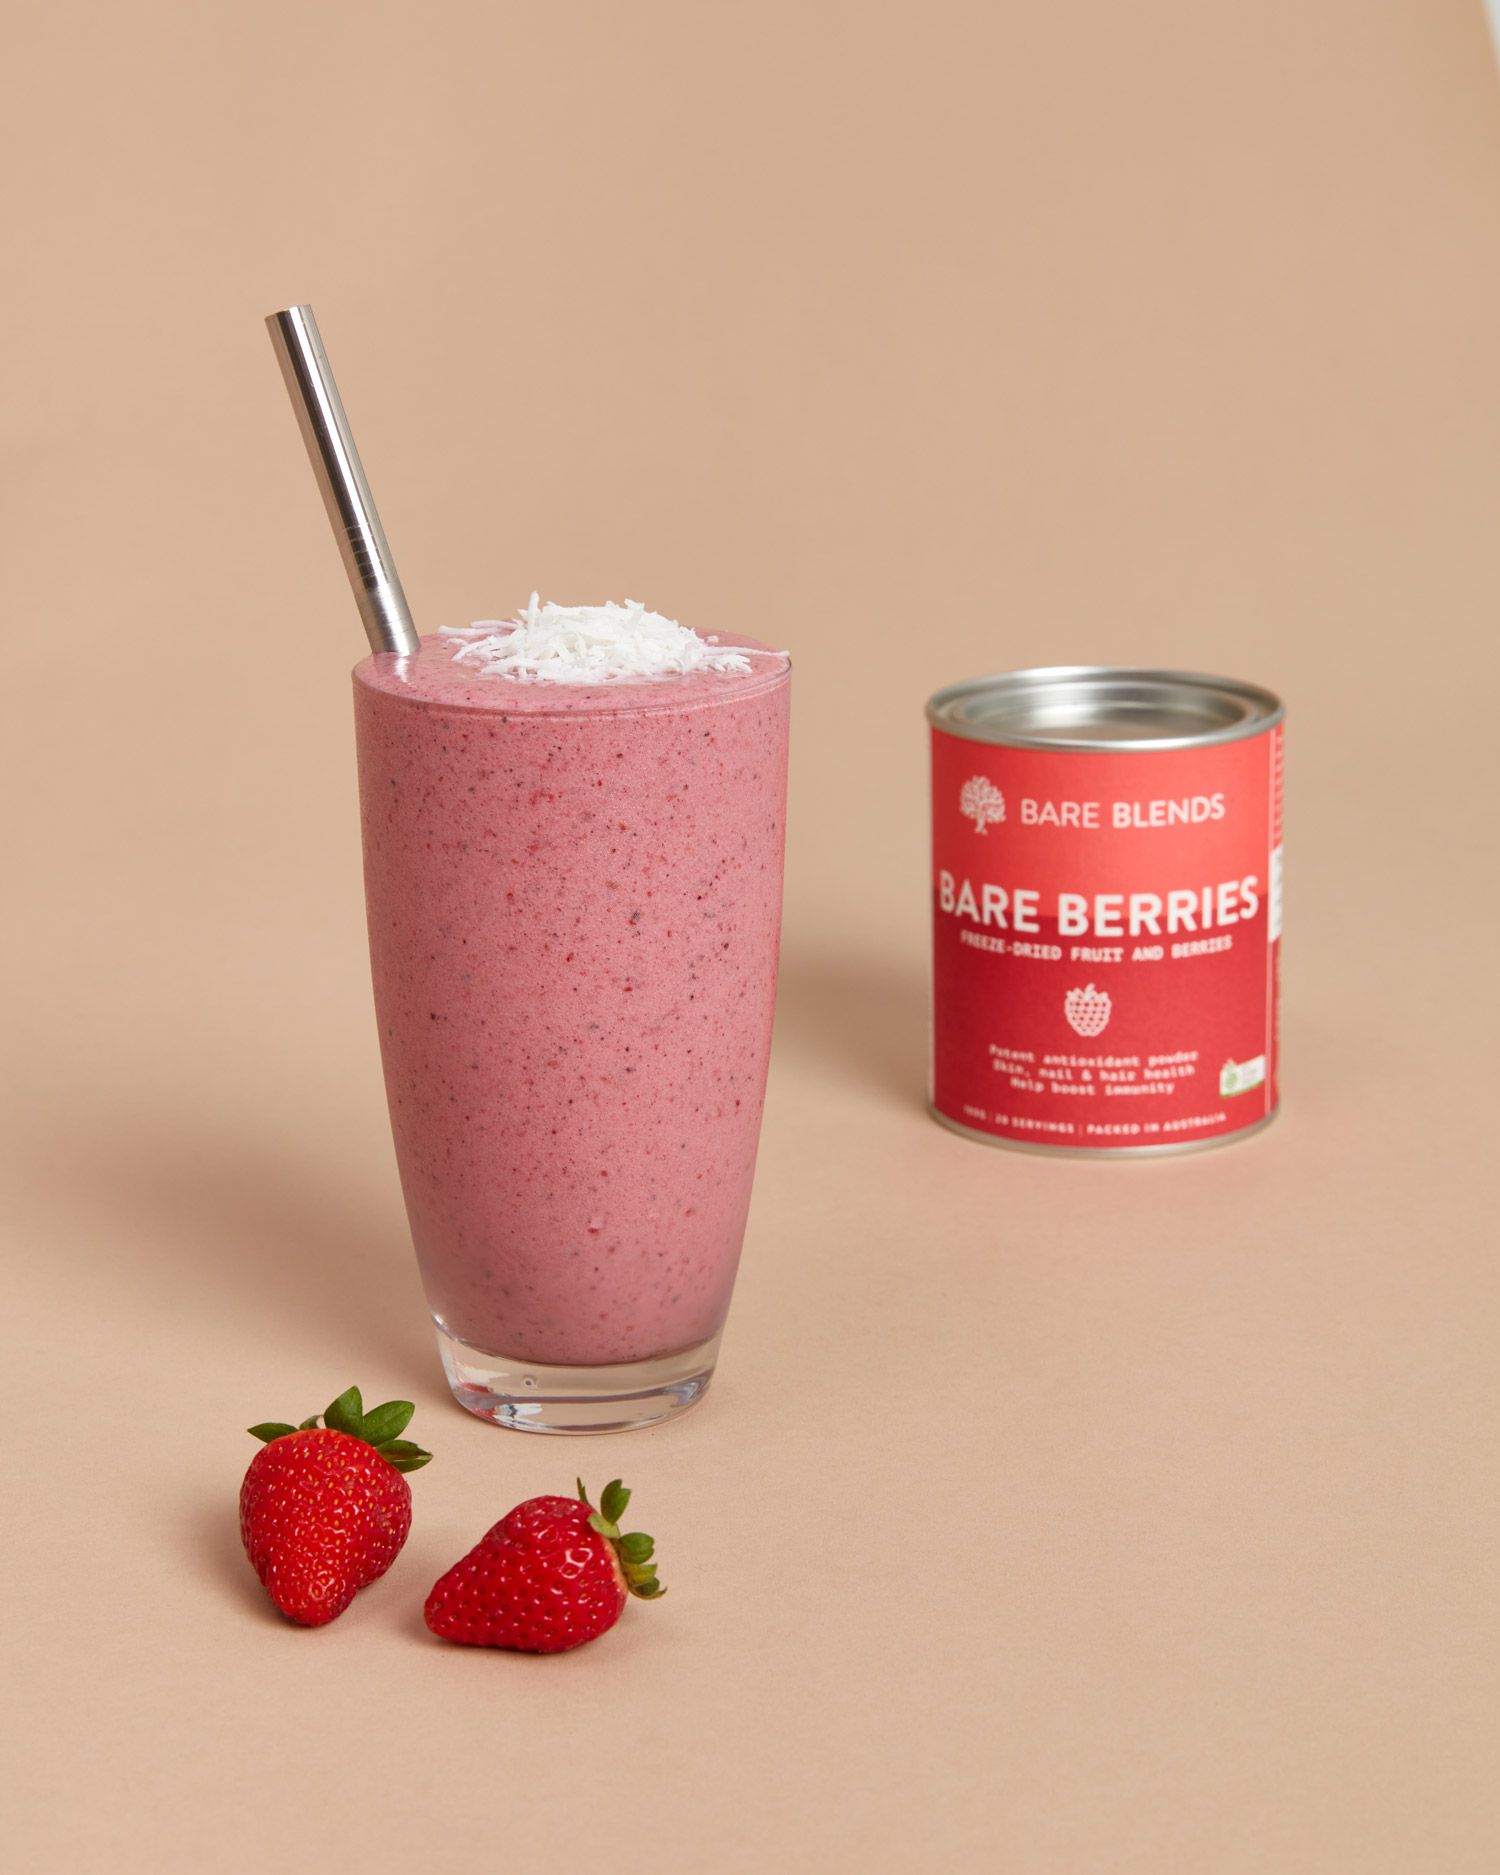 Bare Berries smoothie